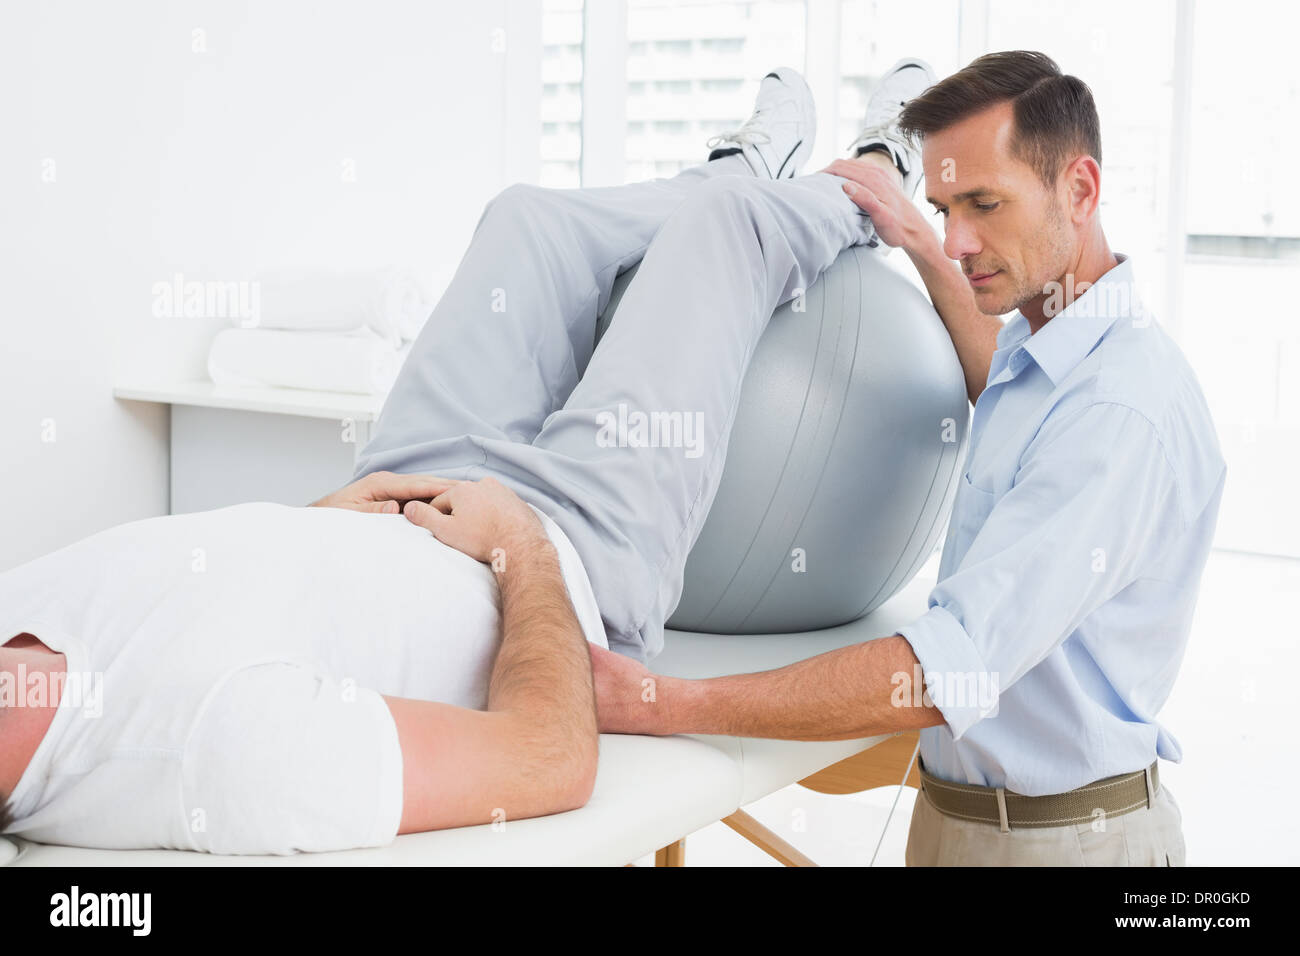 Physical therapist assisting man with yoga ball Stock Photo